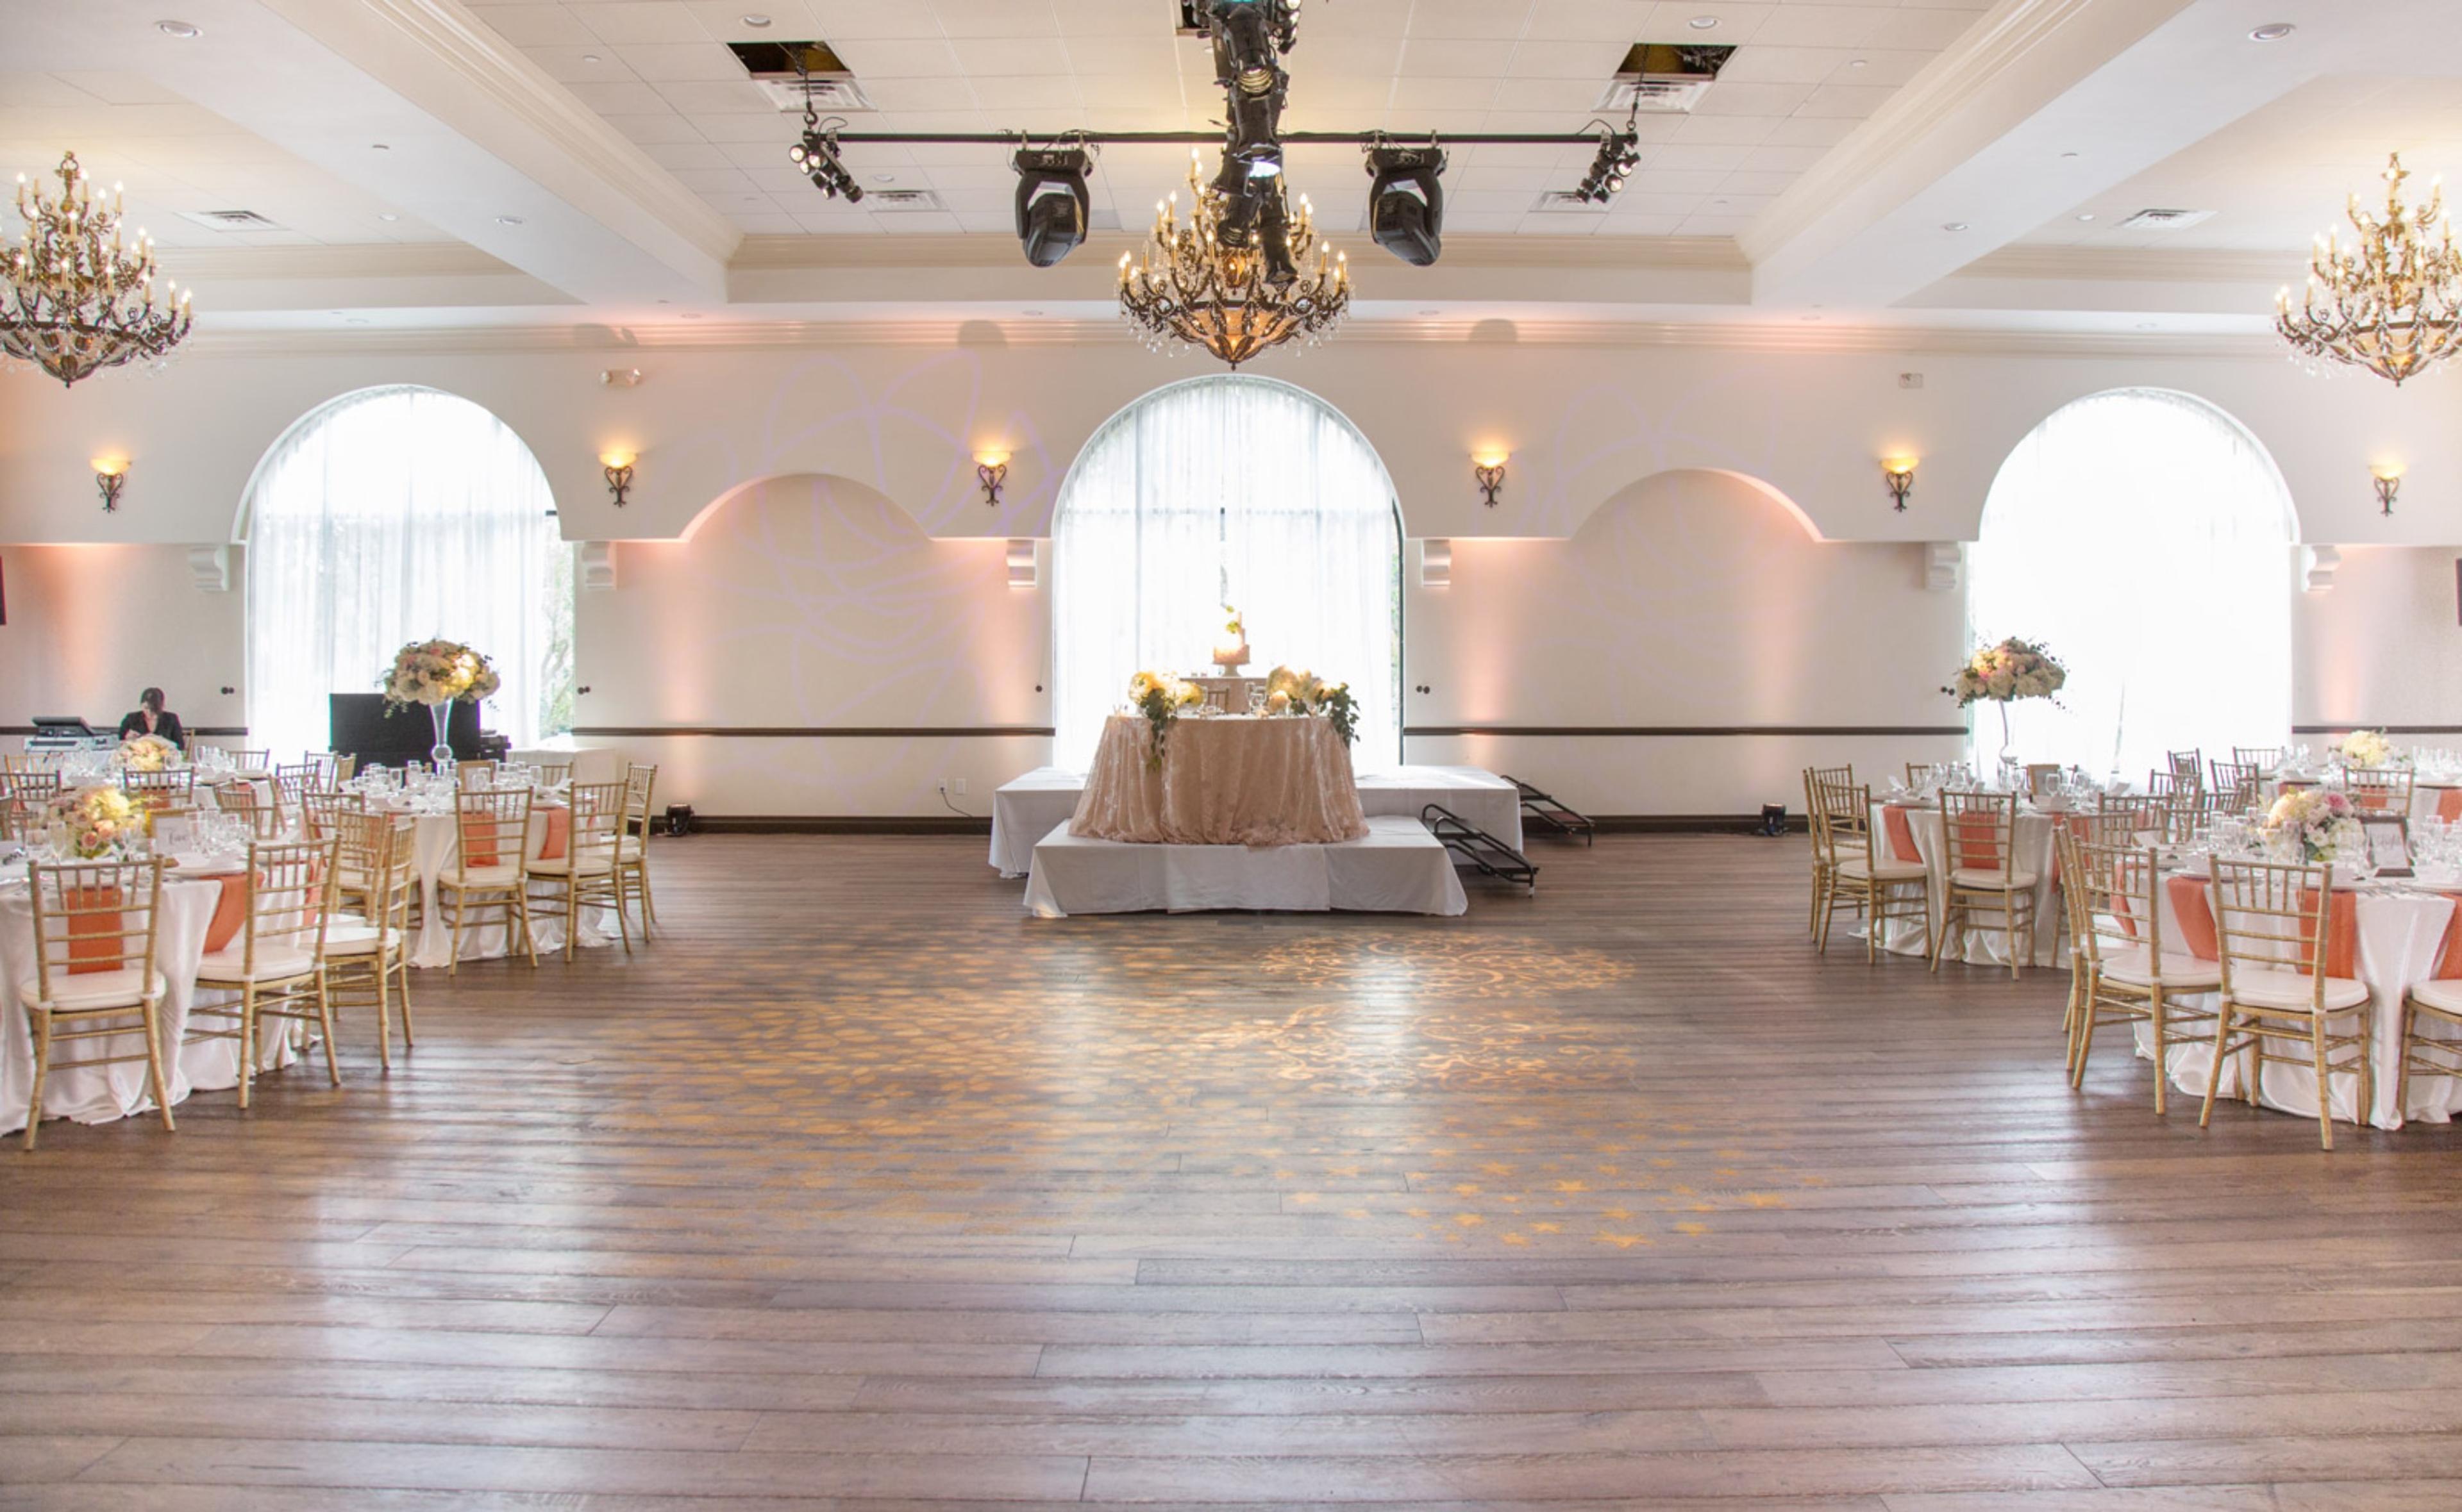 The Villa at Lifetime Weddings & Events